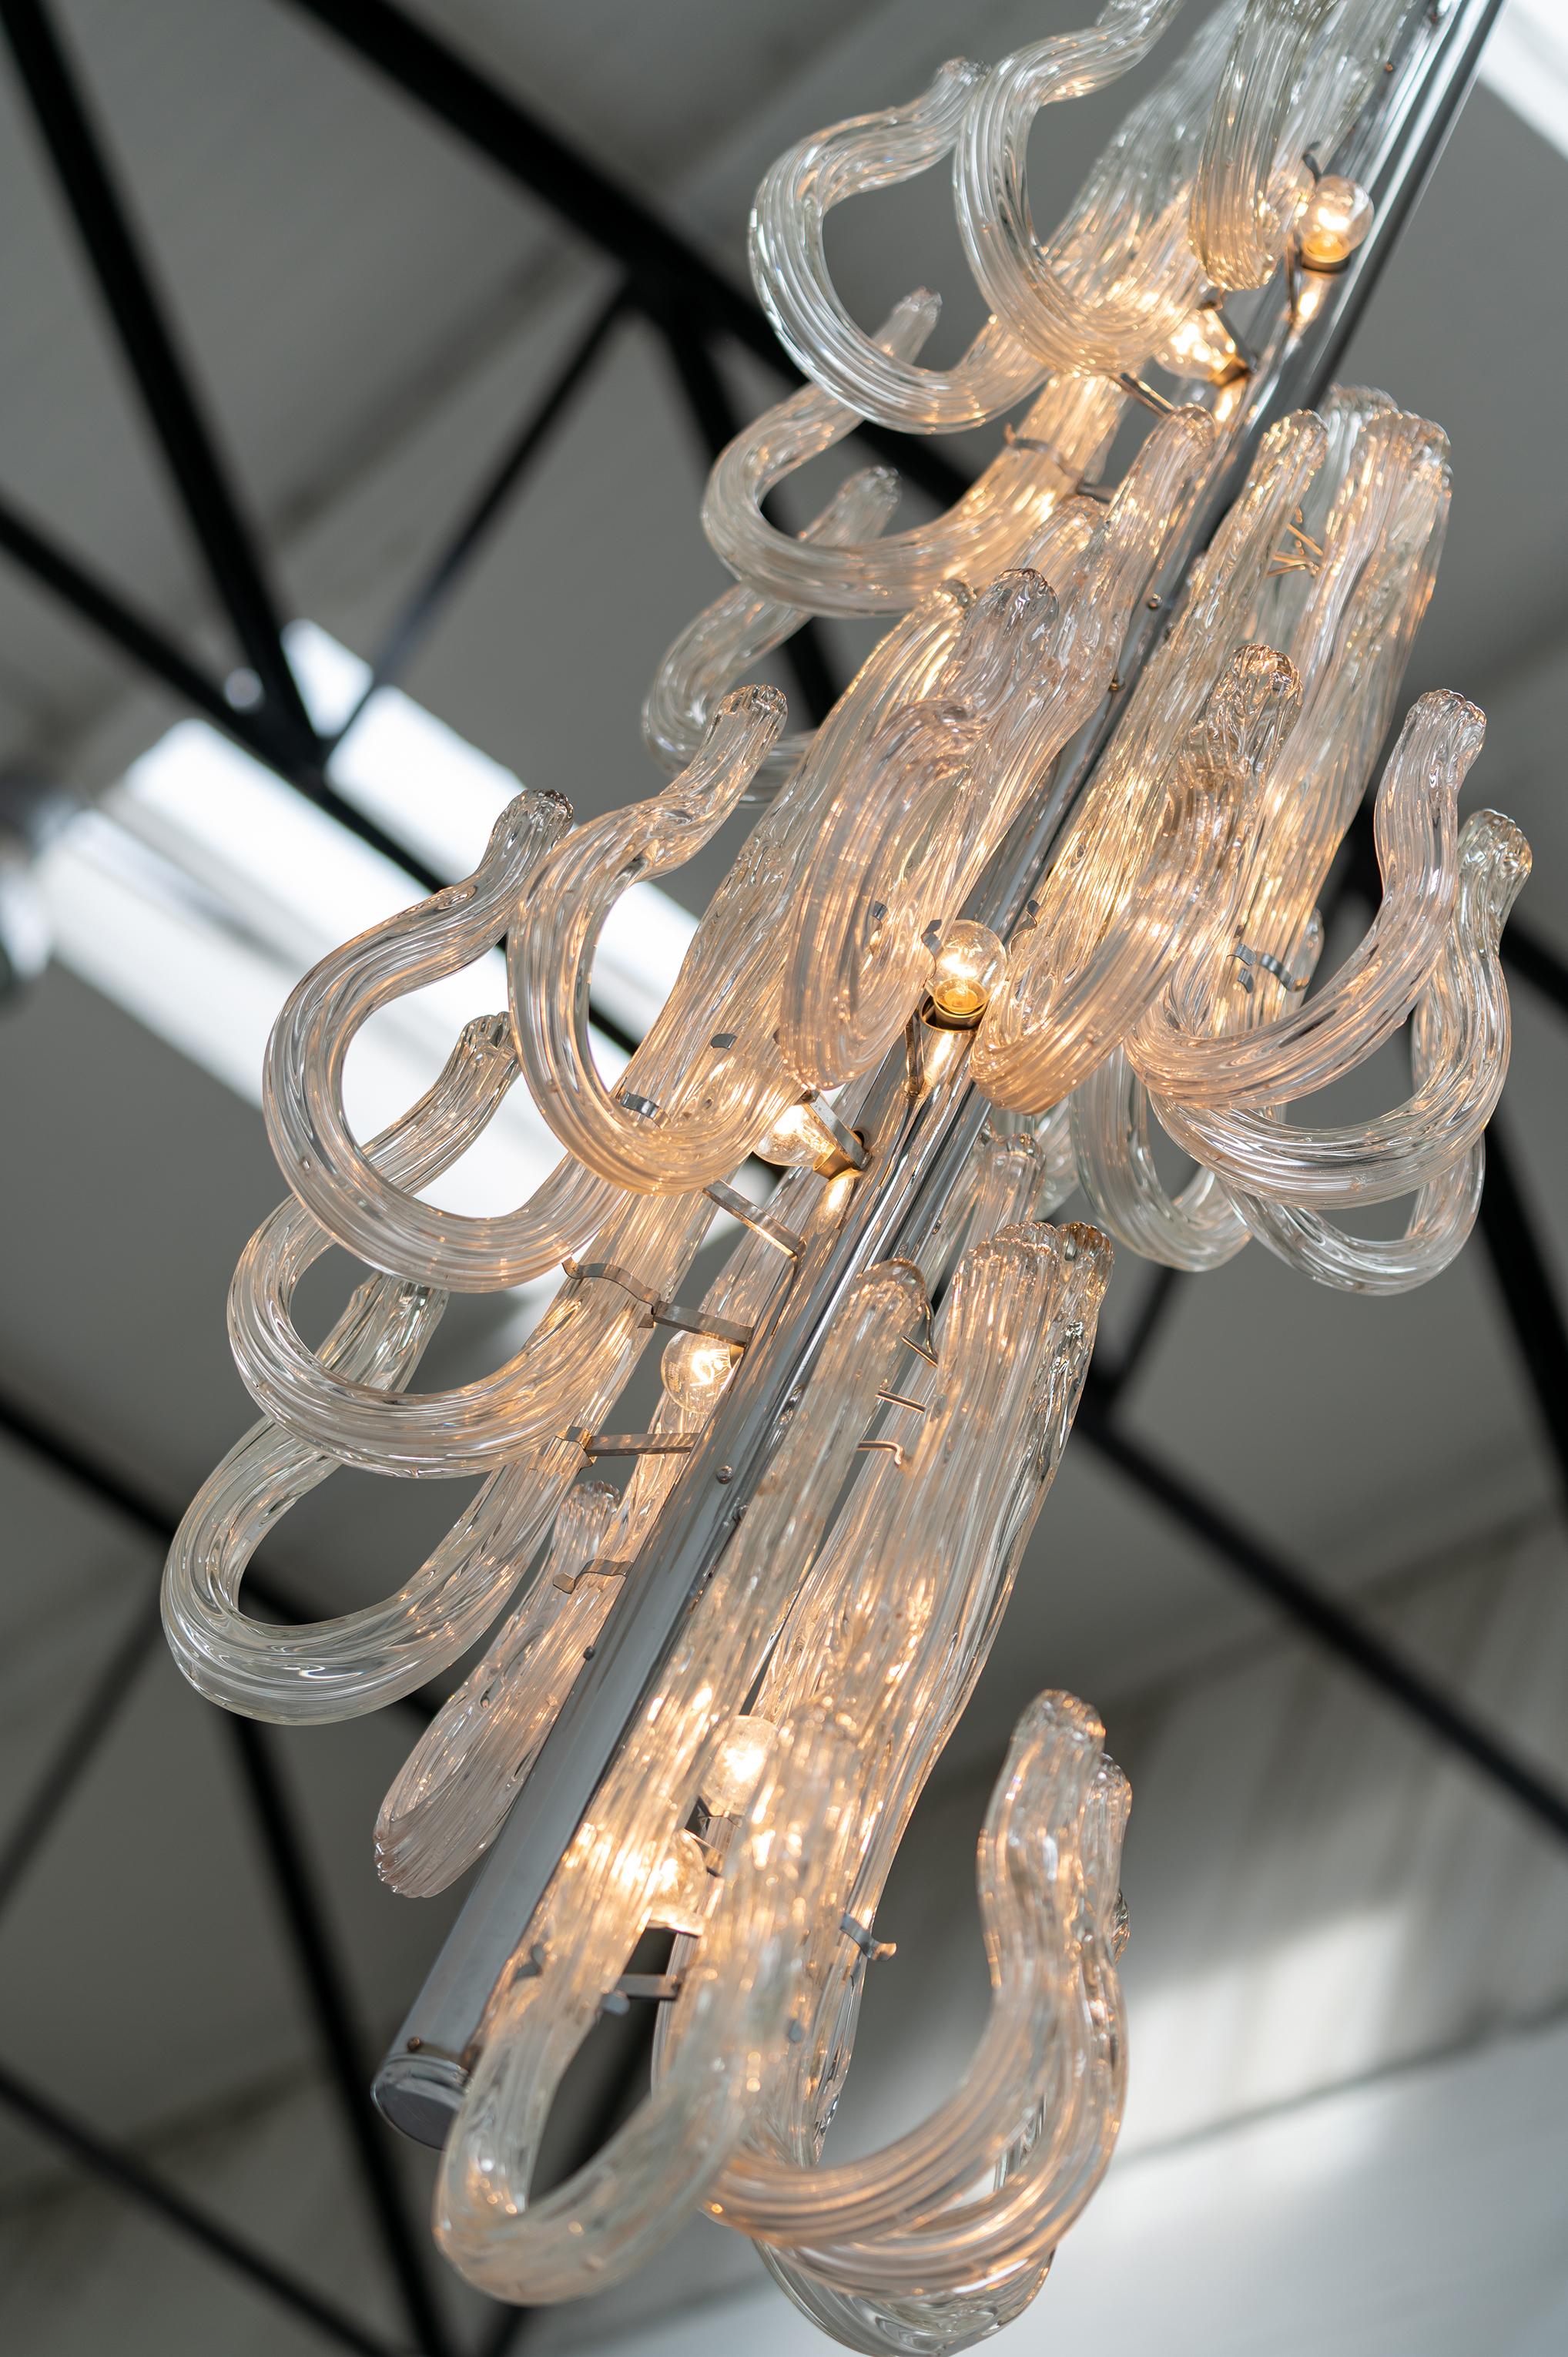 You have the rare opportunity to acquire an absolutely stunning modern chandelier from the house of Venini, Italy.
The magnificent model 